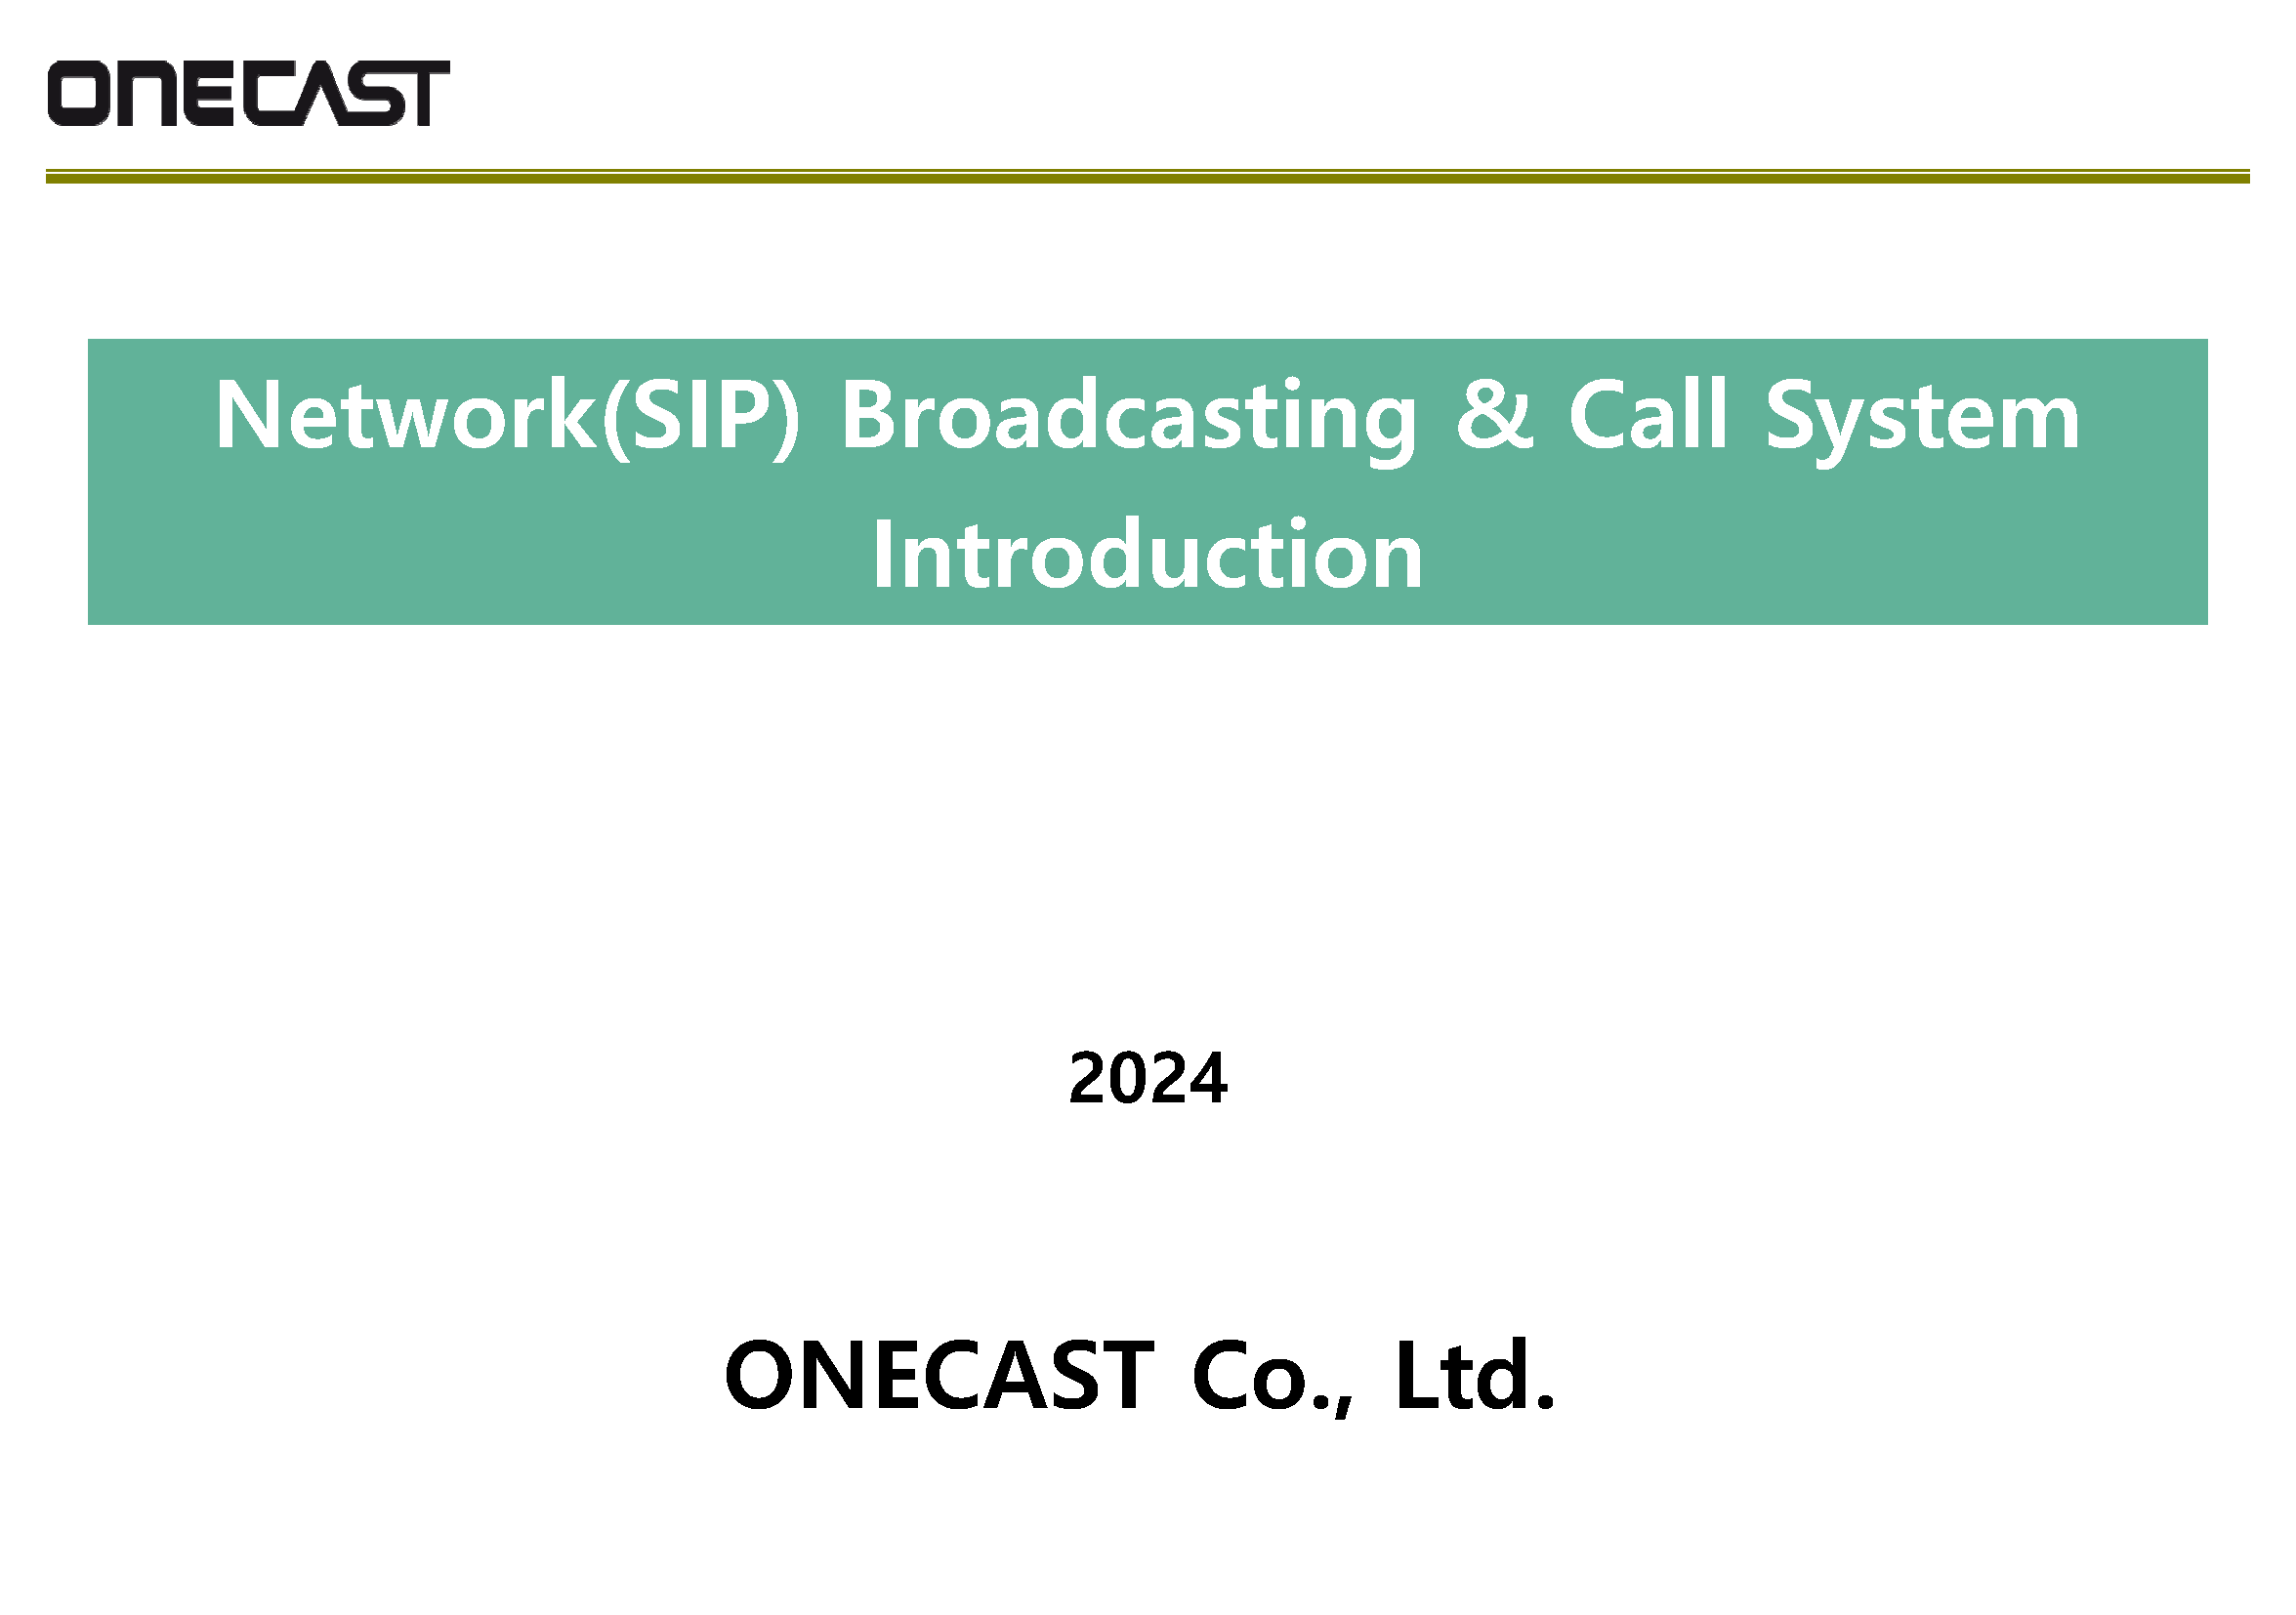 Network(SIP) Broadcasting & Call System Inroduction